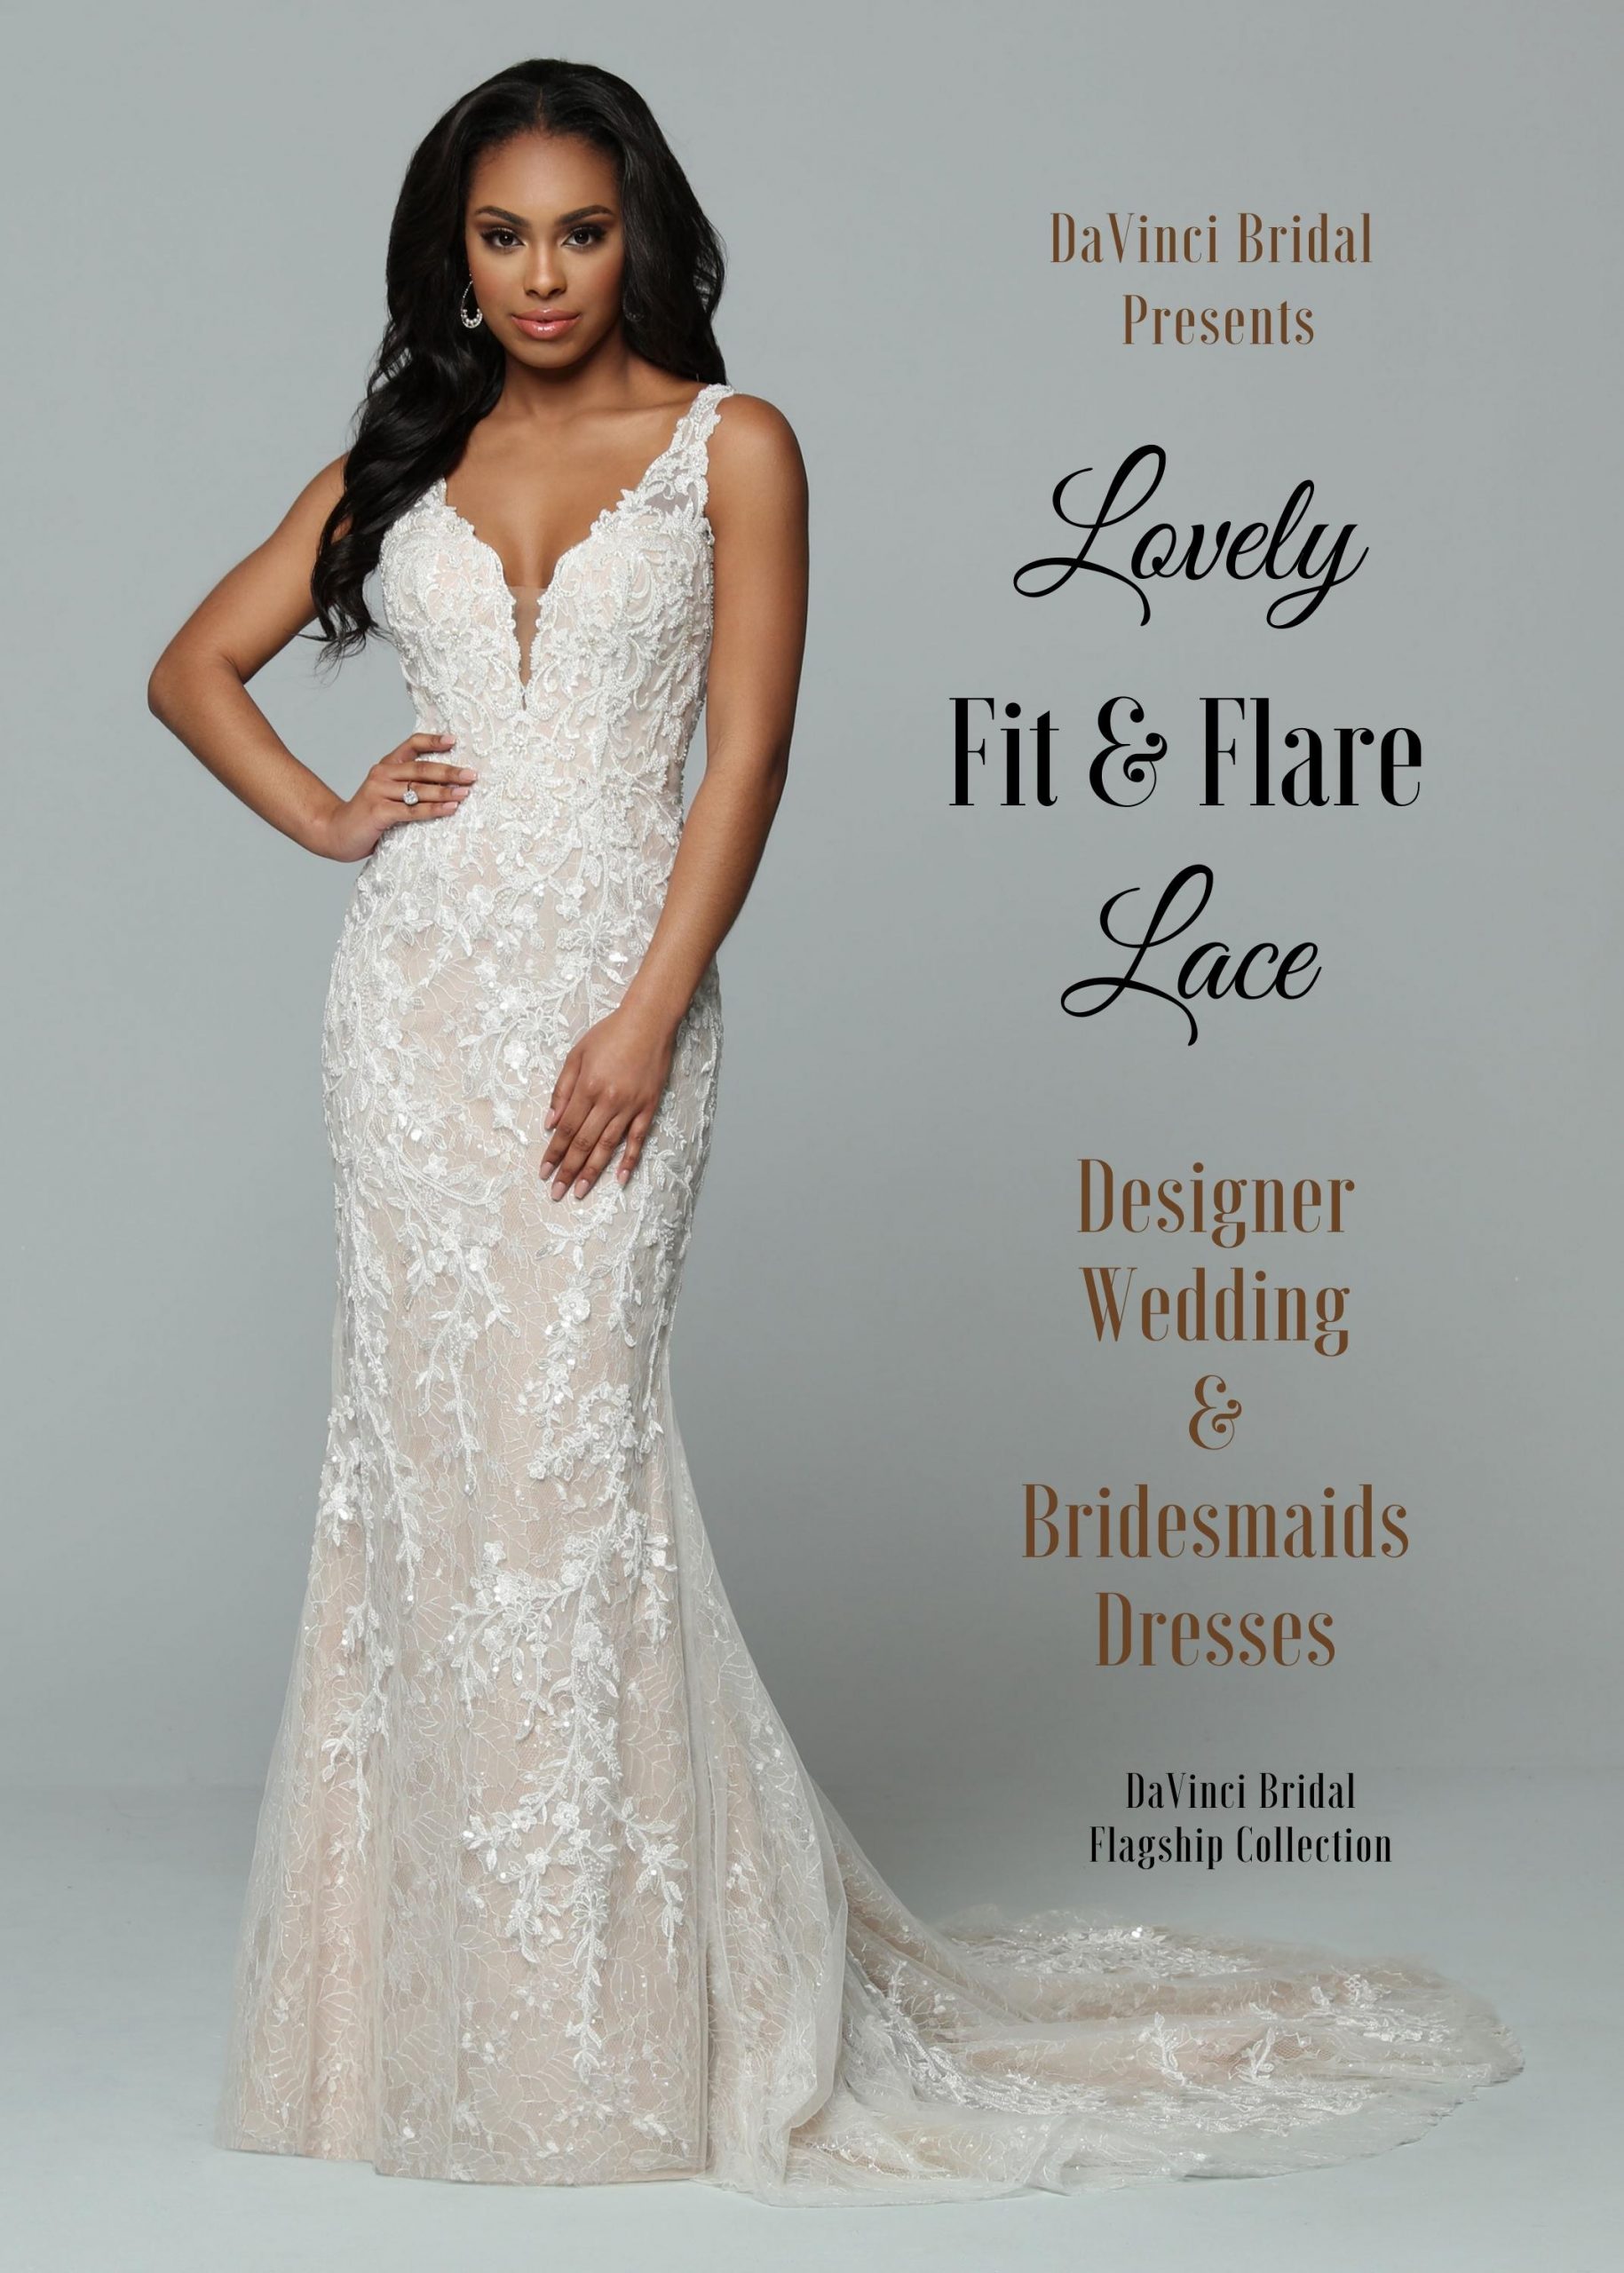 Accessorizing Your Lace Fit and Flare Wedding Dress